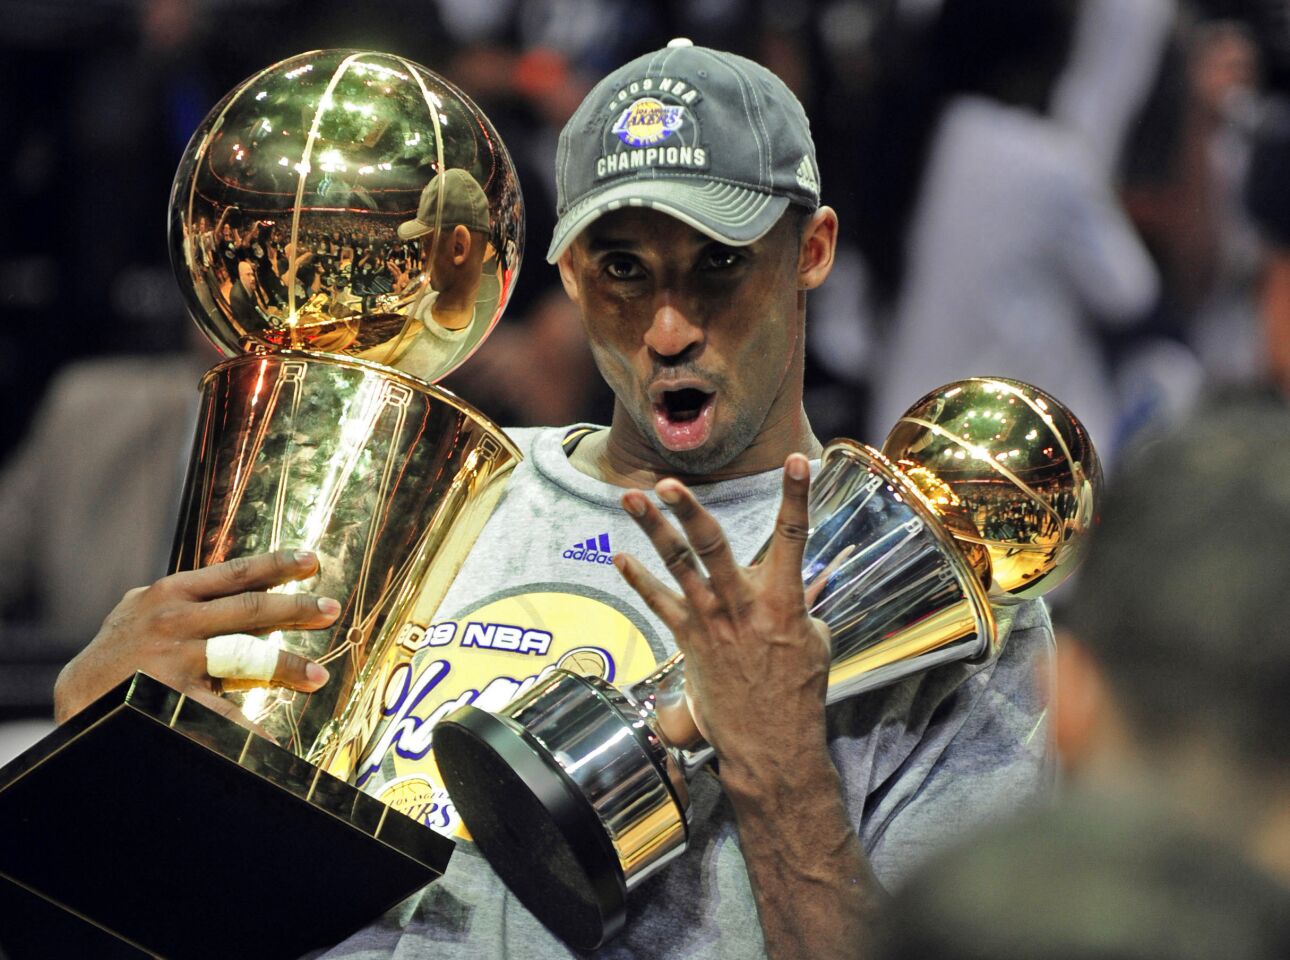 Kobe Bryant holds the championship and Finals MVP trophies and puts up four fingers after winning his fourth title.